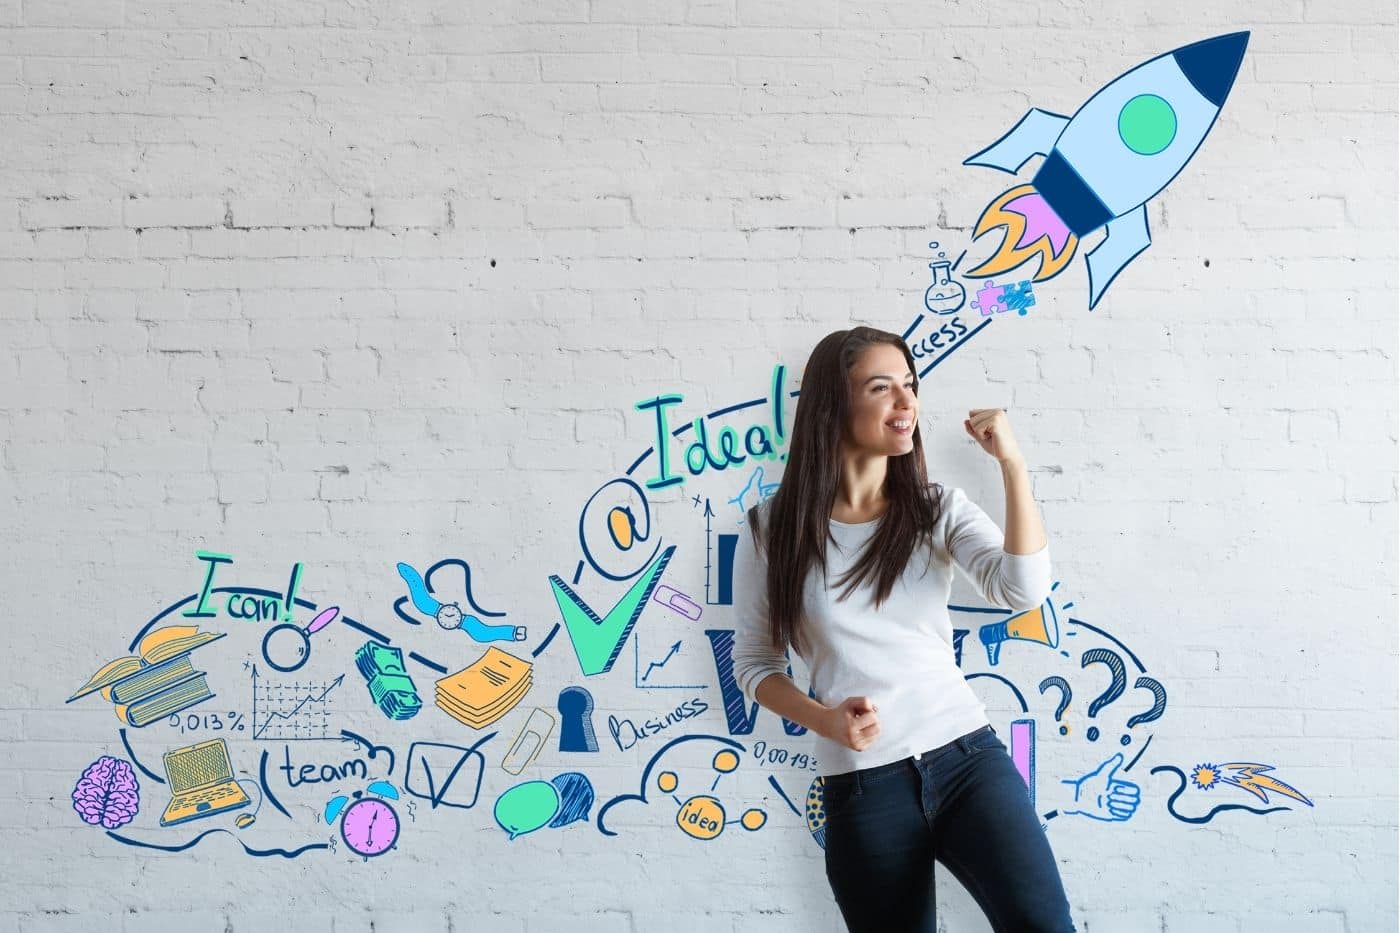 Motivated woman standing in front of graffiti rocket depicting the stages of business growth.